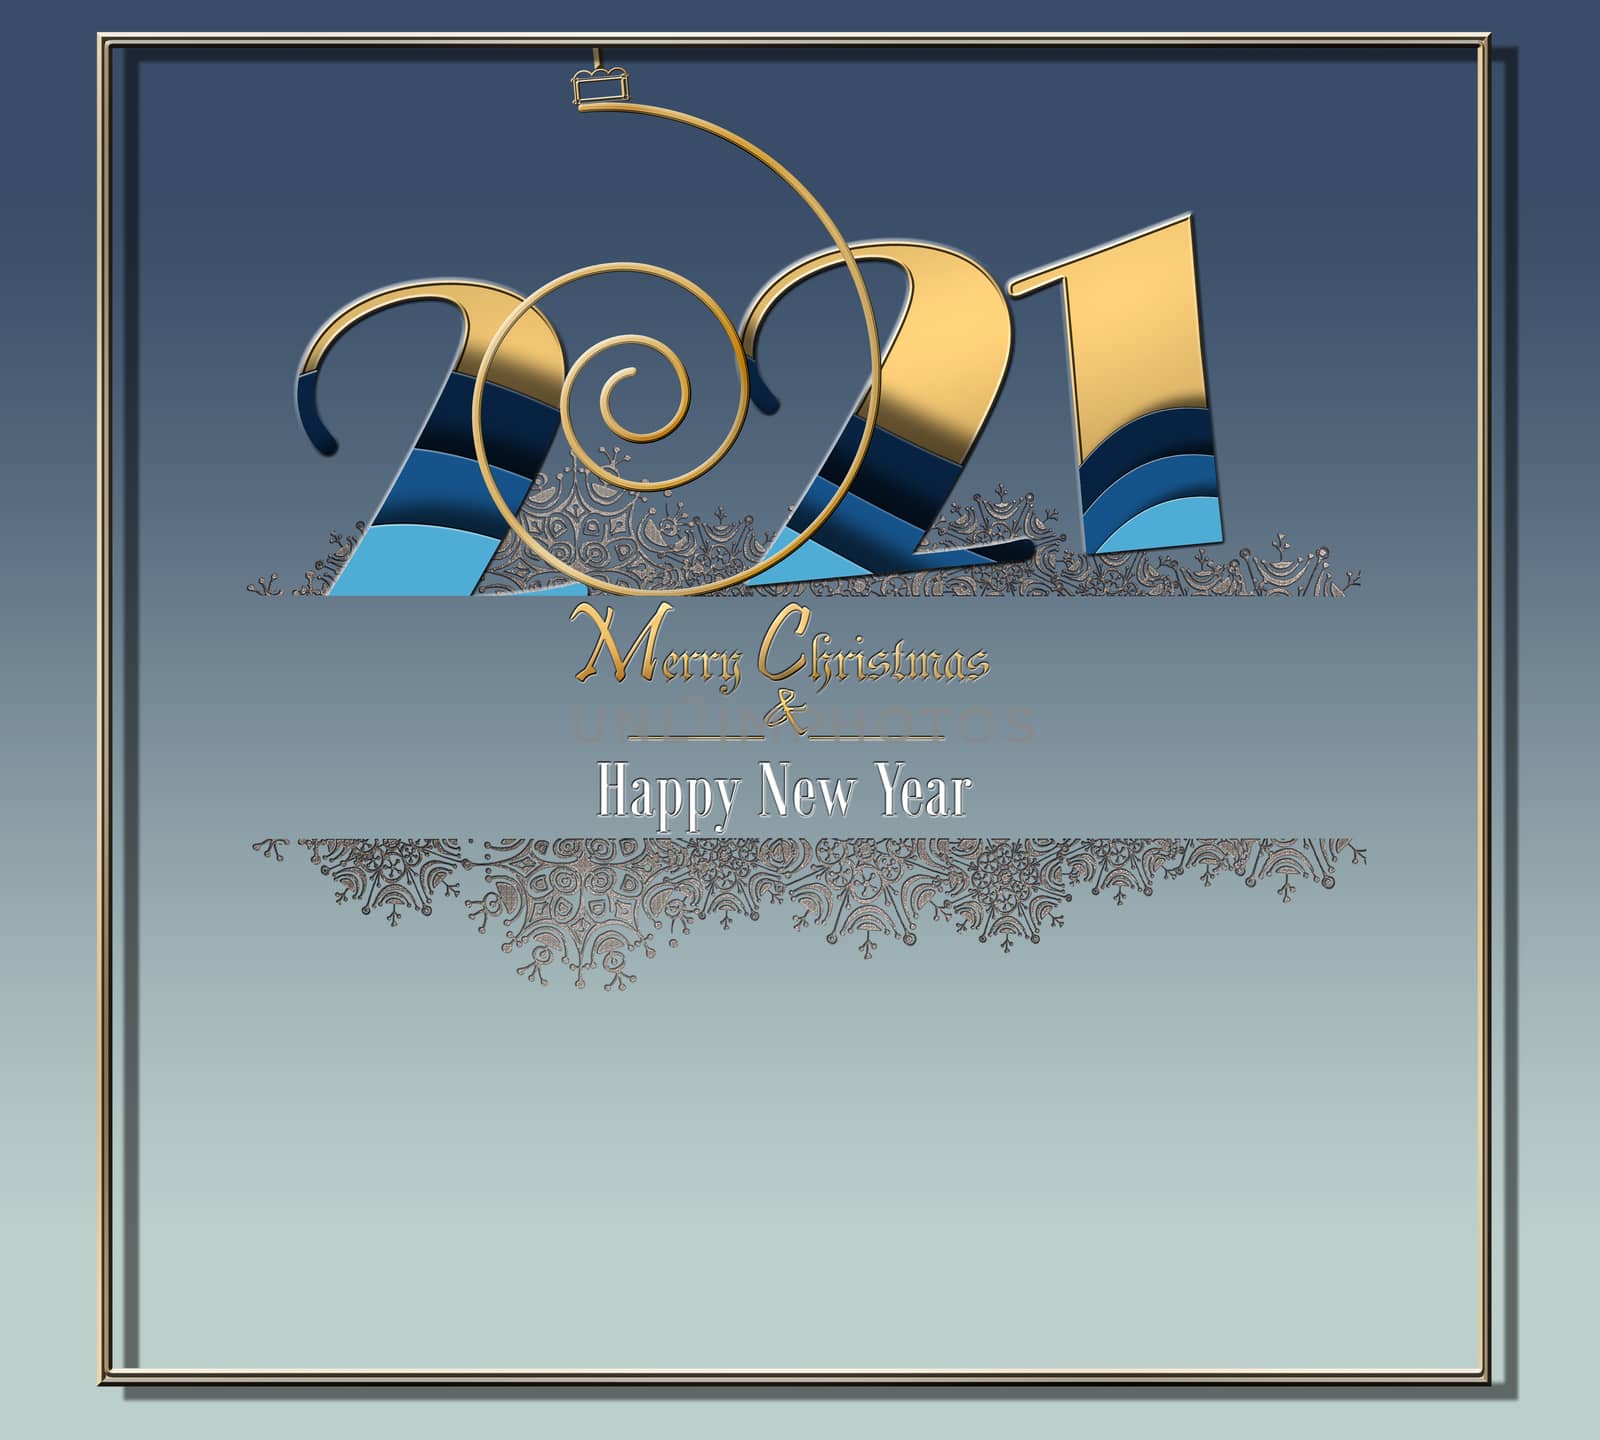 2021 New Year luxury elegant greeting card with shining gold frame of snowflakes on pastel blue background and digits 2021, text Merry Christmas Happy New Year. Banner, poster, 3D Illustration.